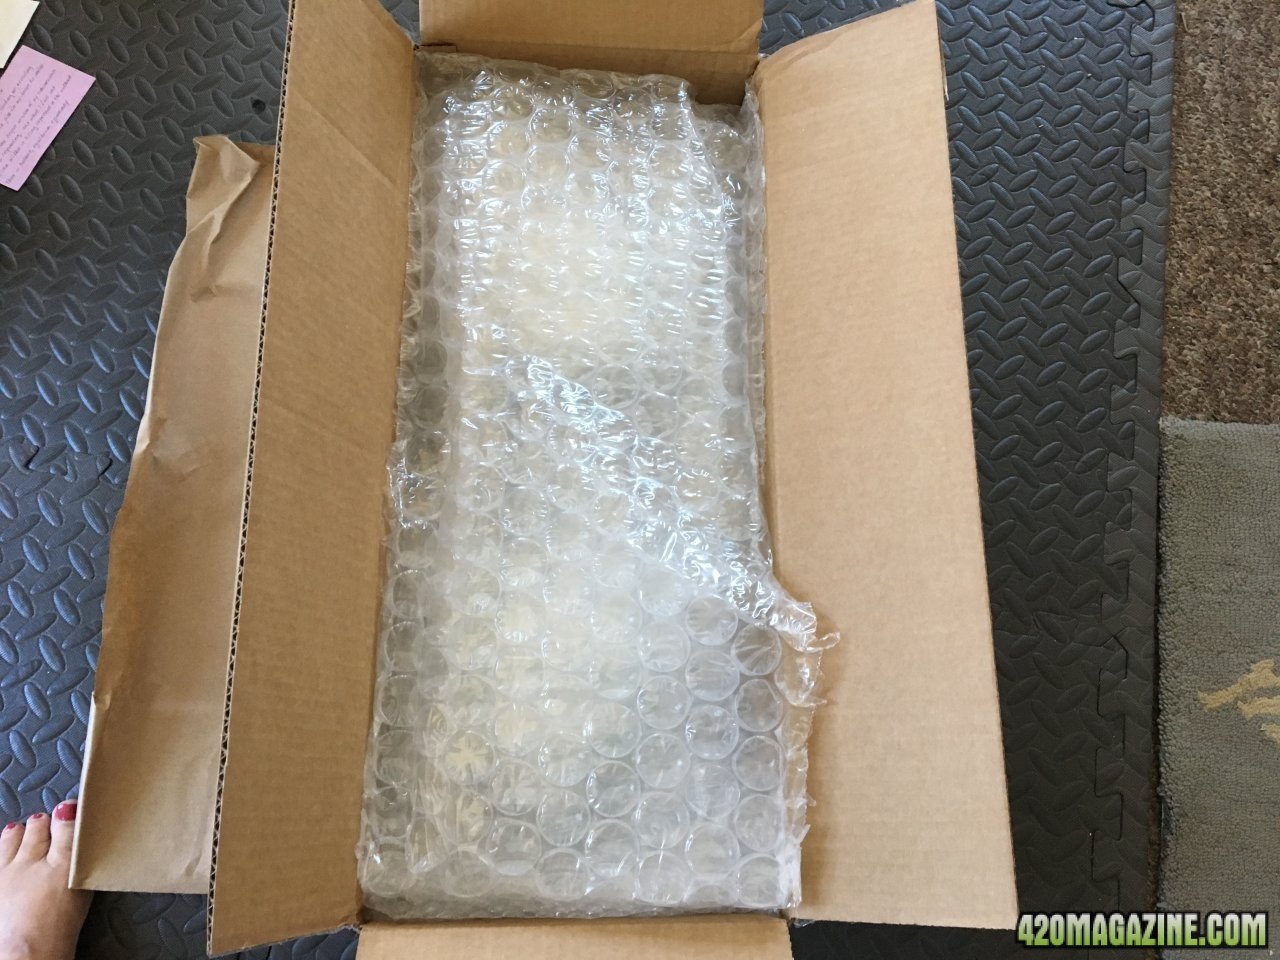 Unboxing Timber Grow Lights